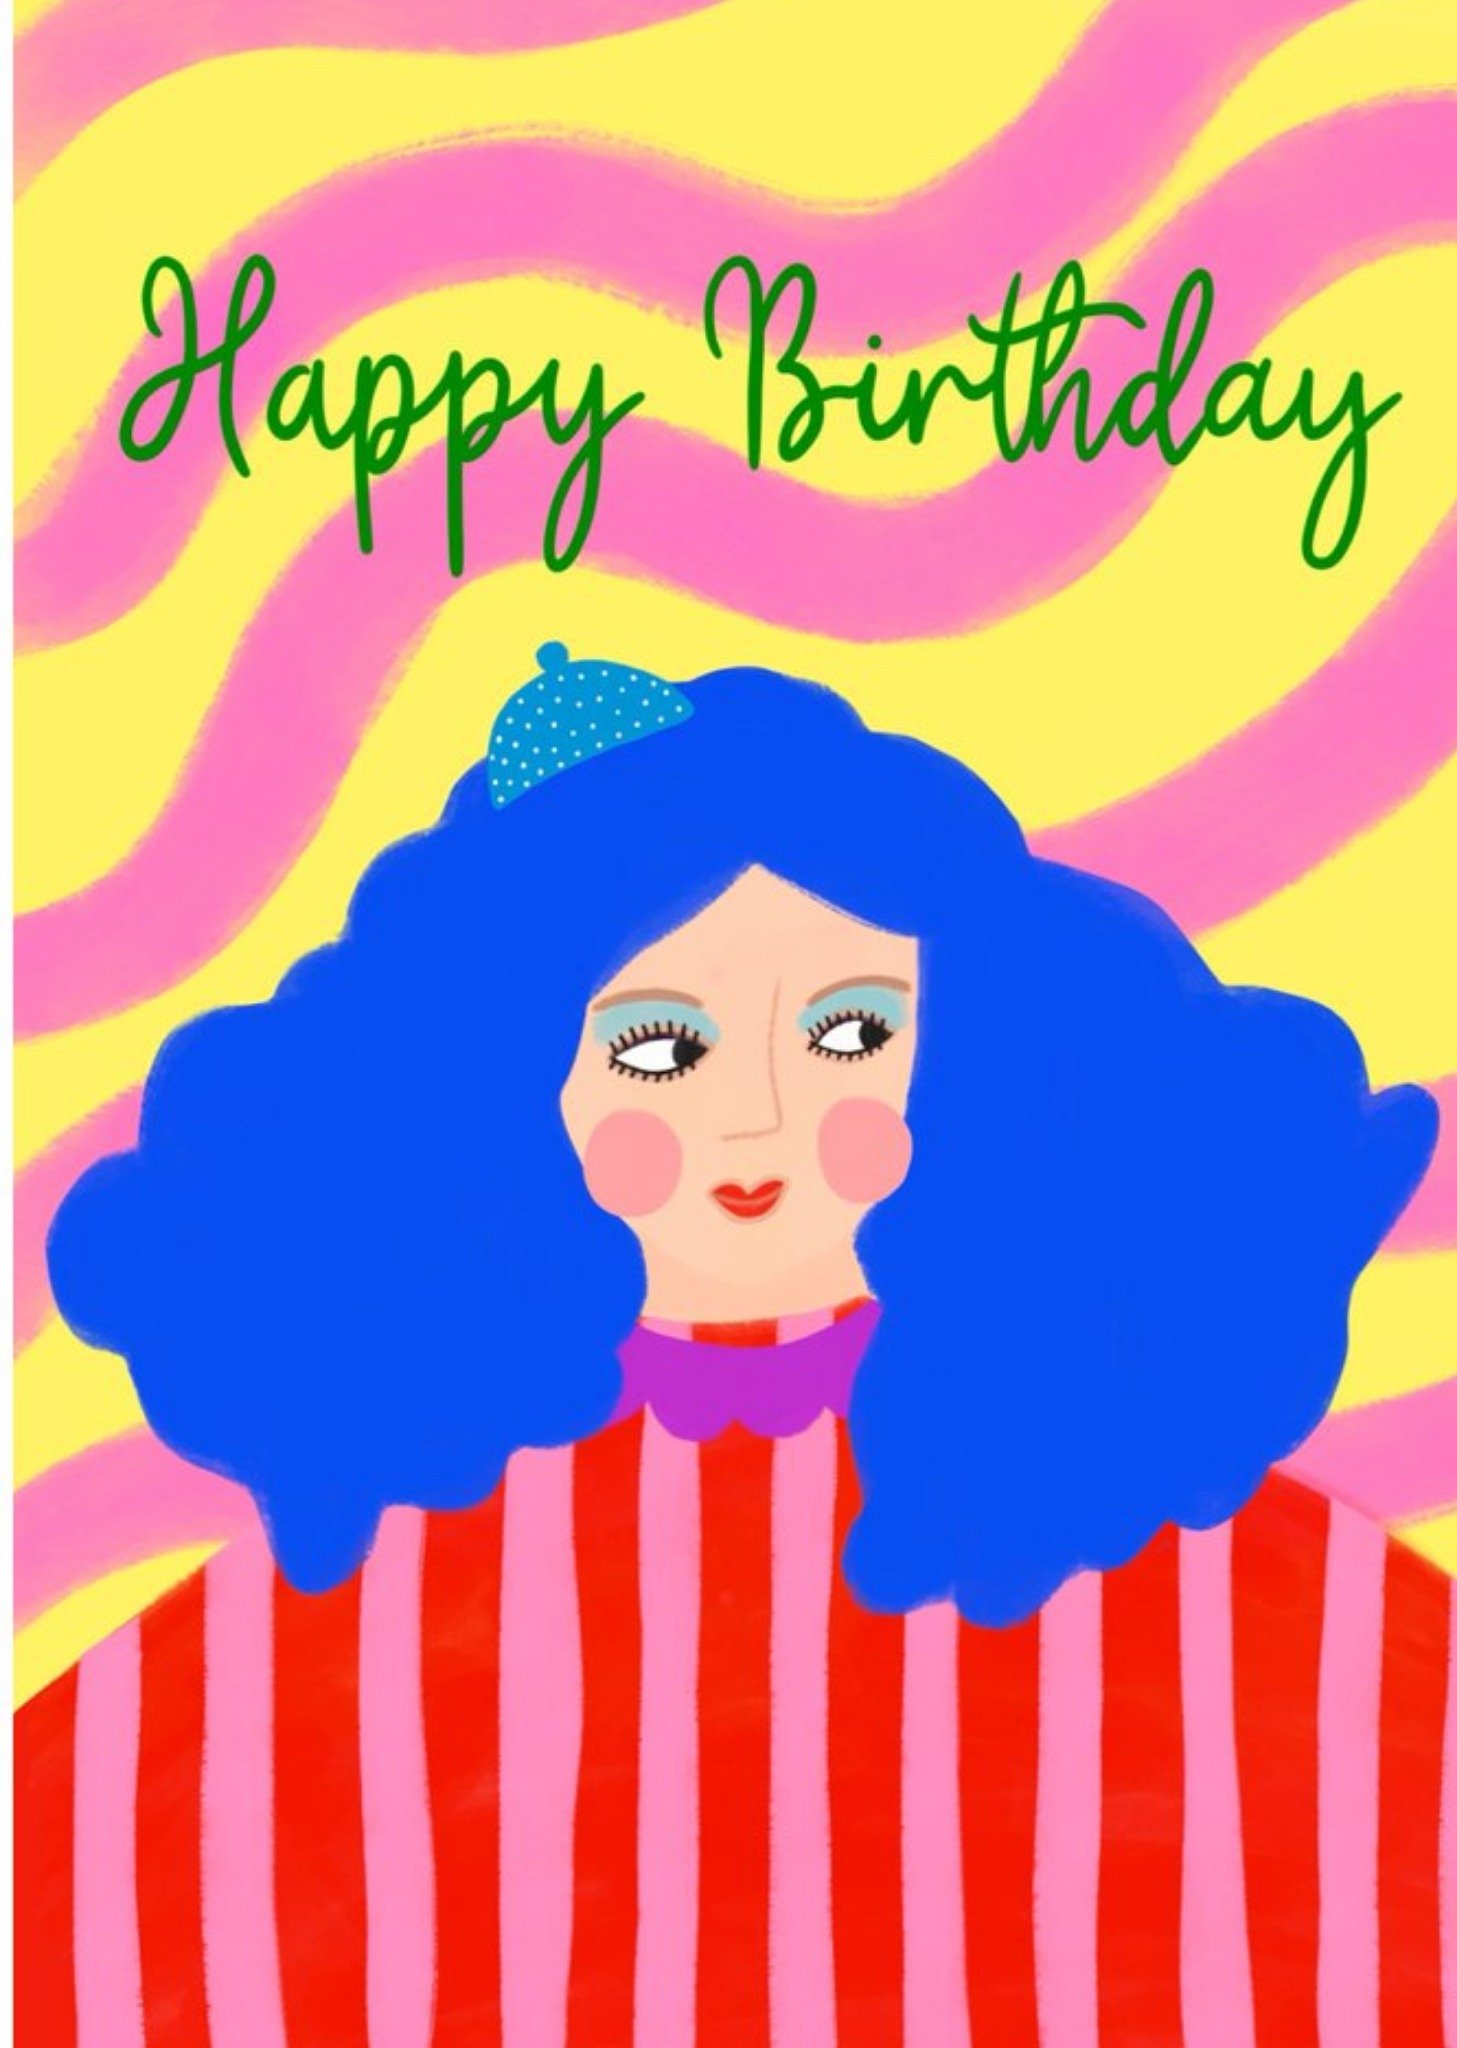 Moonpig Colourful Patterent Illustrated Woman Birthday Card Ecard